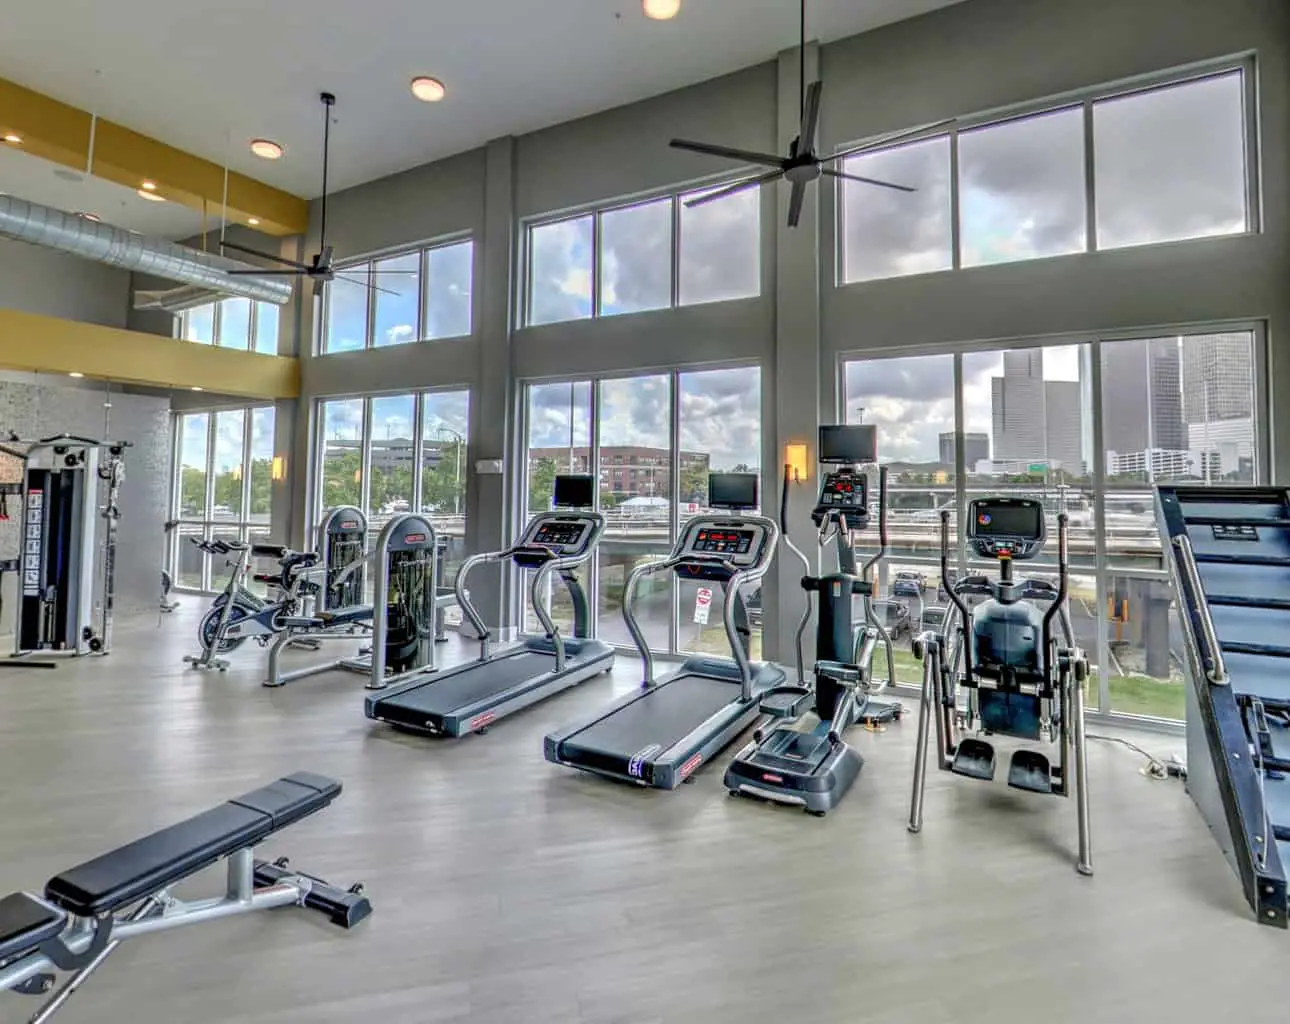 Treadmills, rowing machines, and other equipments in a gym